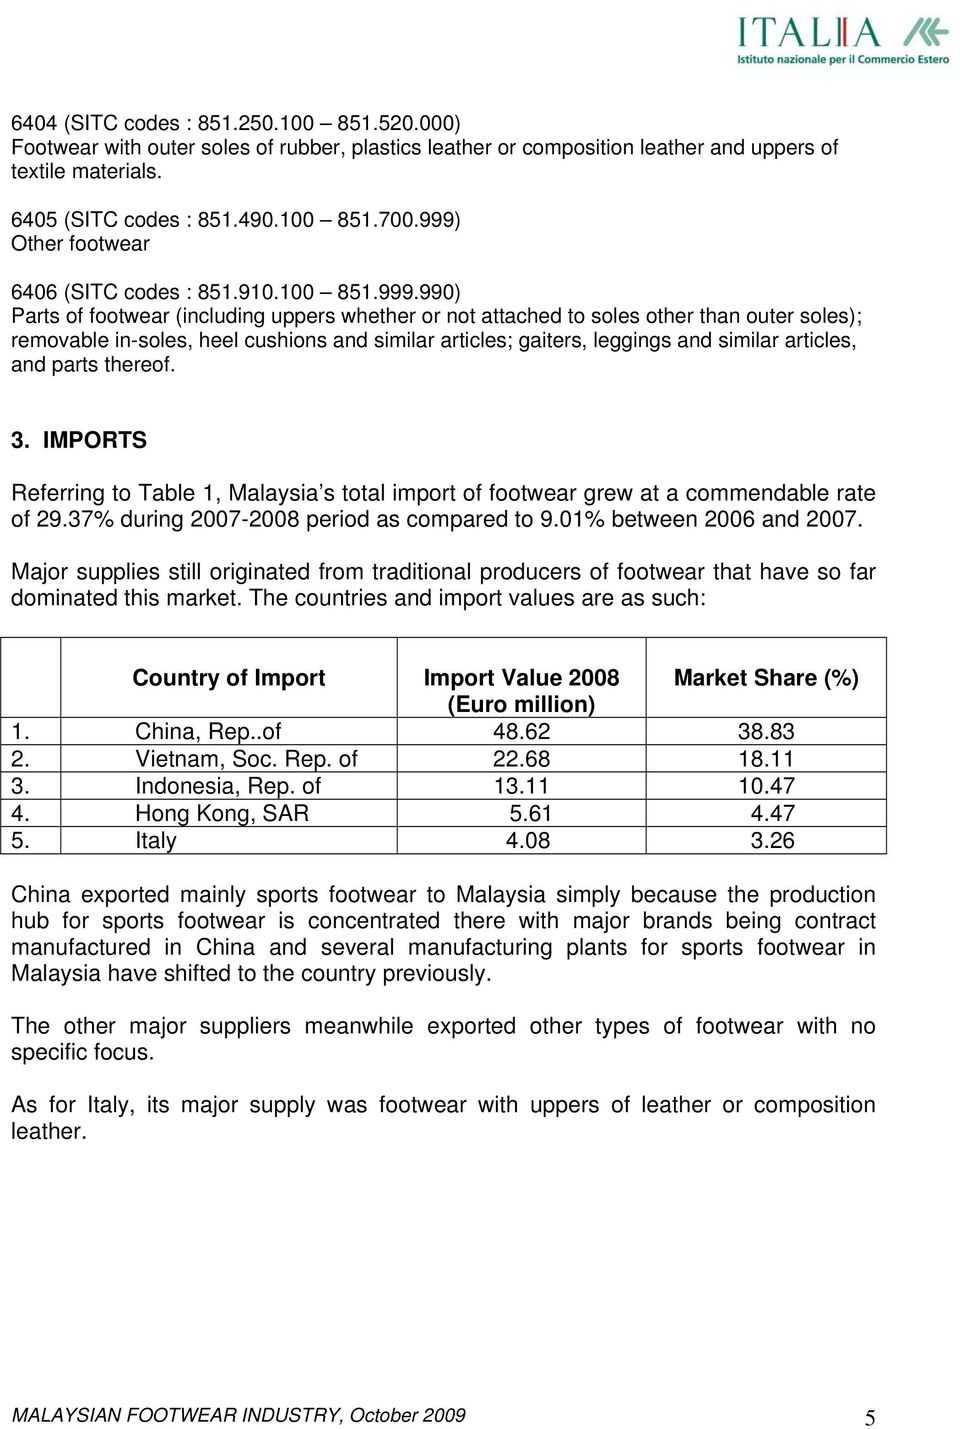 similar articles; gaiters, leggings and similar articles, and parts thereof. 3. IMPORTS Referring to Table 1, Malaysia s total import of footwear grew at a commendable rate of 29.